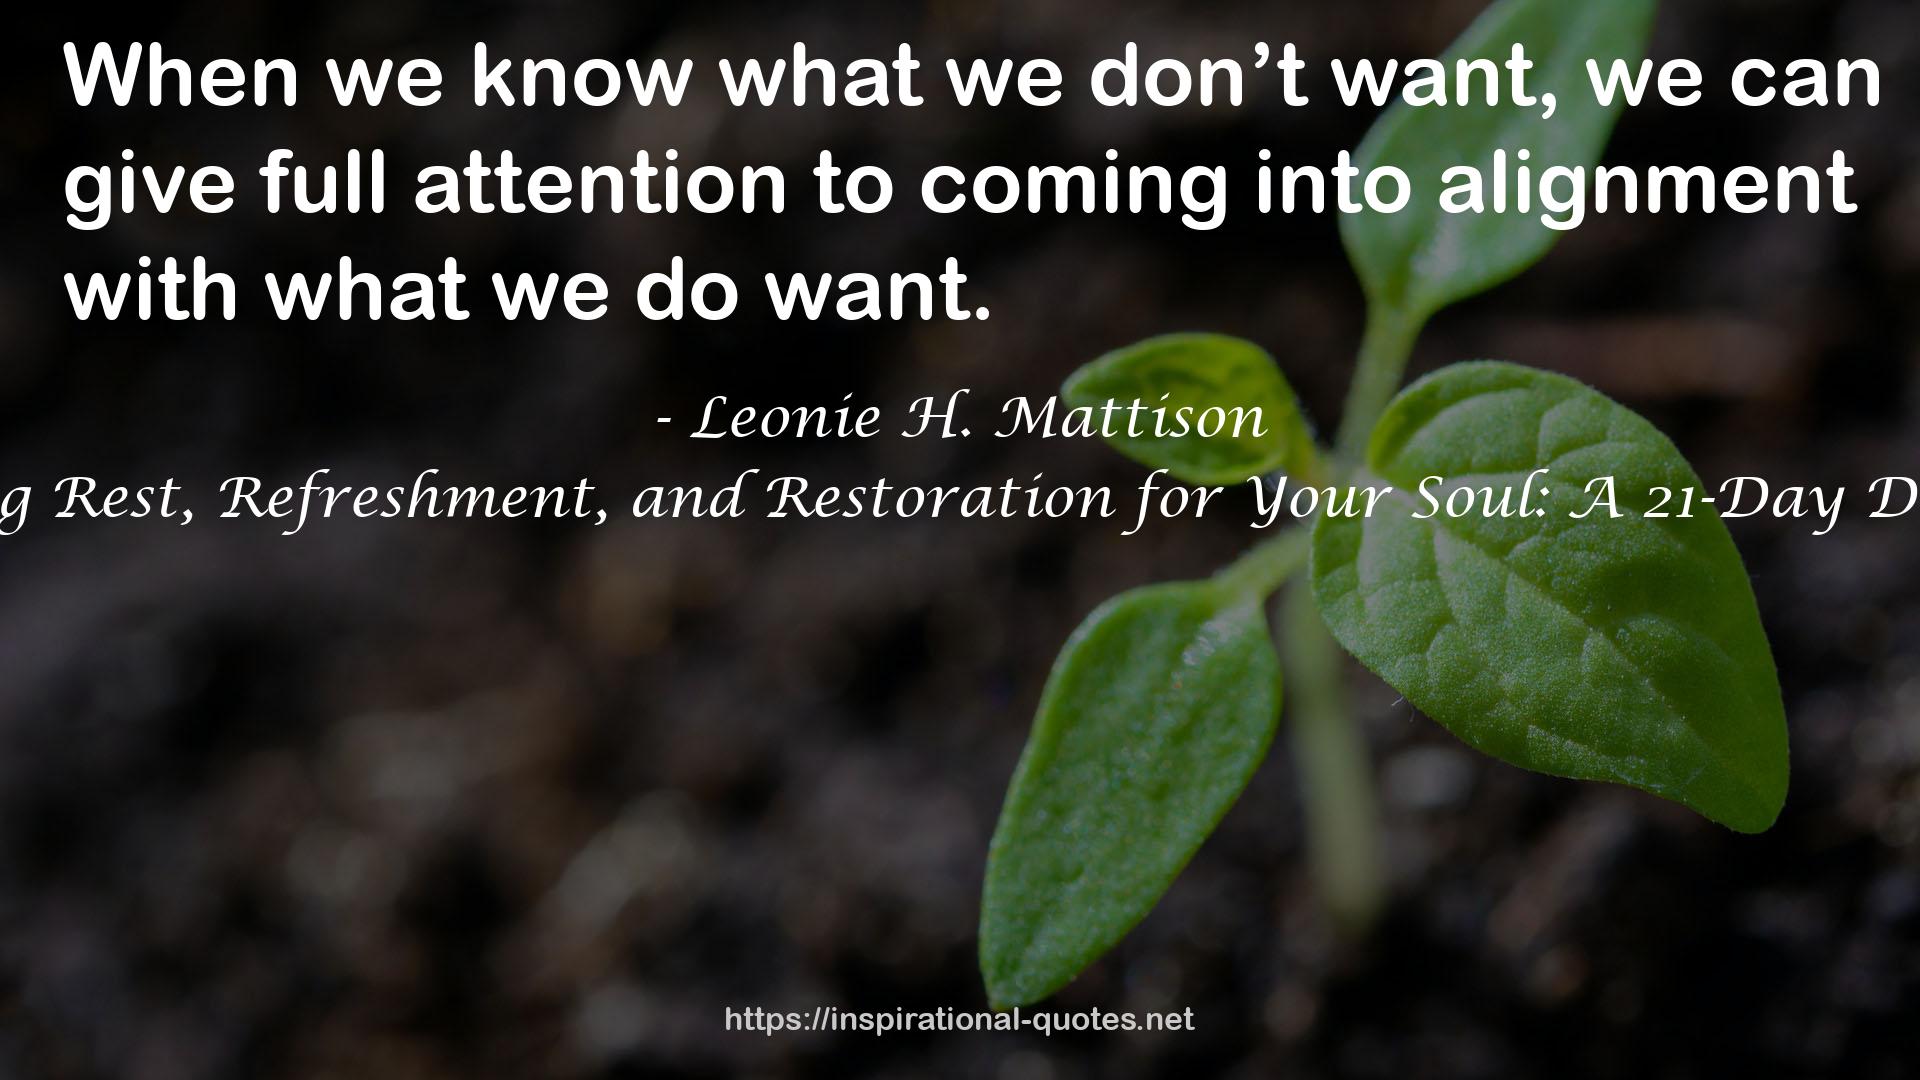 BESIDE STILL WATERS: Finding Rest, Refreshment, and Restoration for Your Soul: A 21-Day Devotional for Survivors of Abuse QUOTES